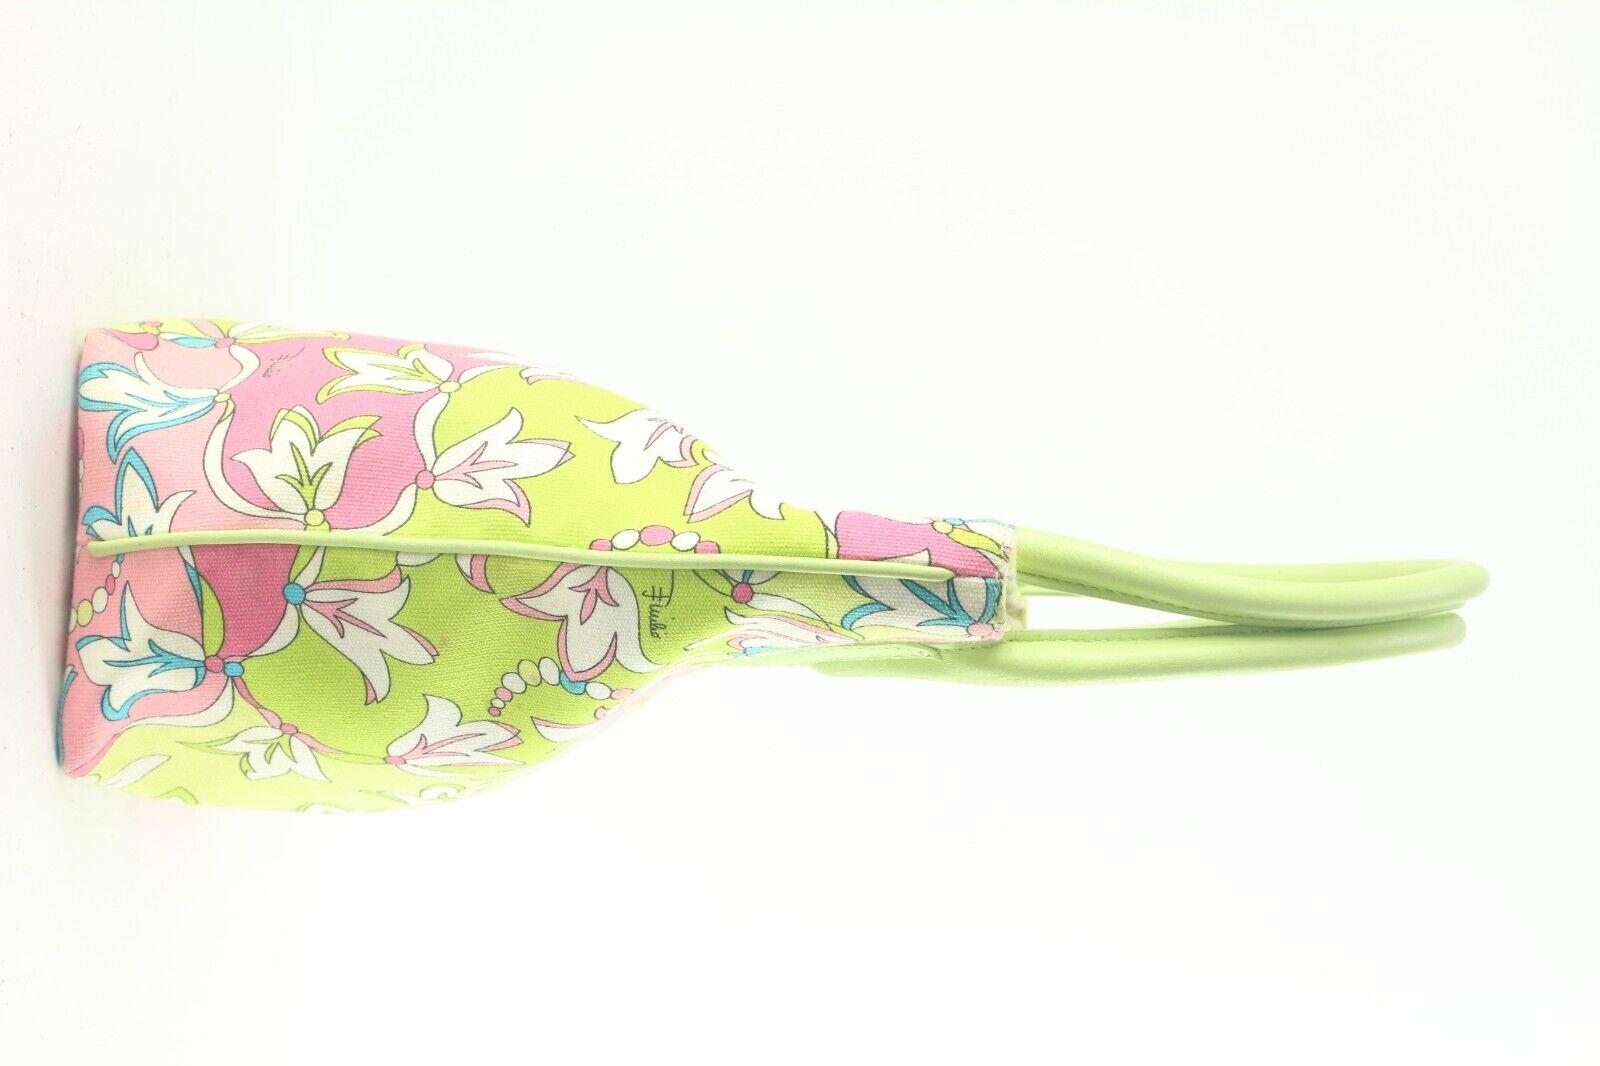 Emilio Pucci Green x Pink Floral Tote 1EP822K In Good Condition For Sale In Dix hills, NY